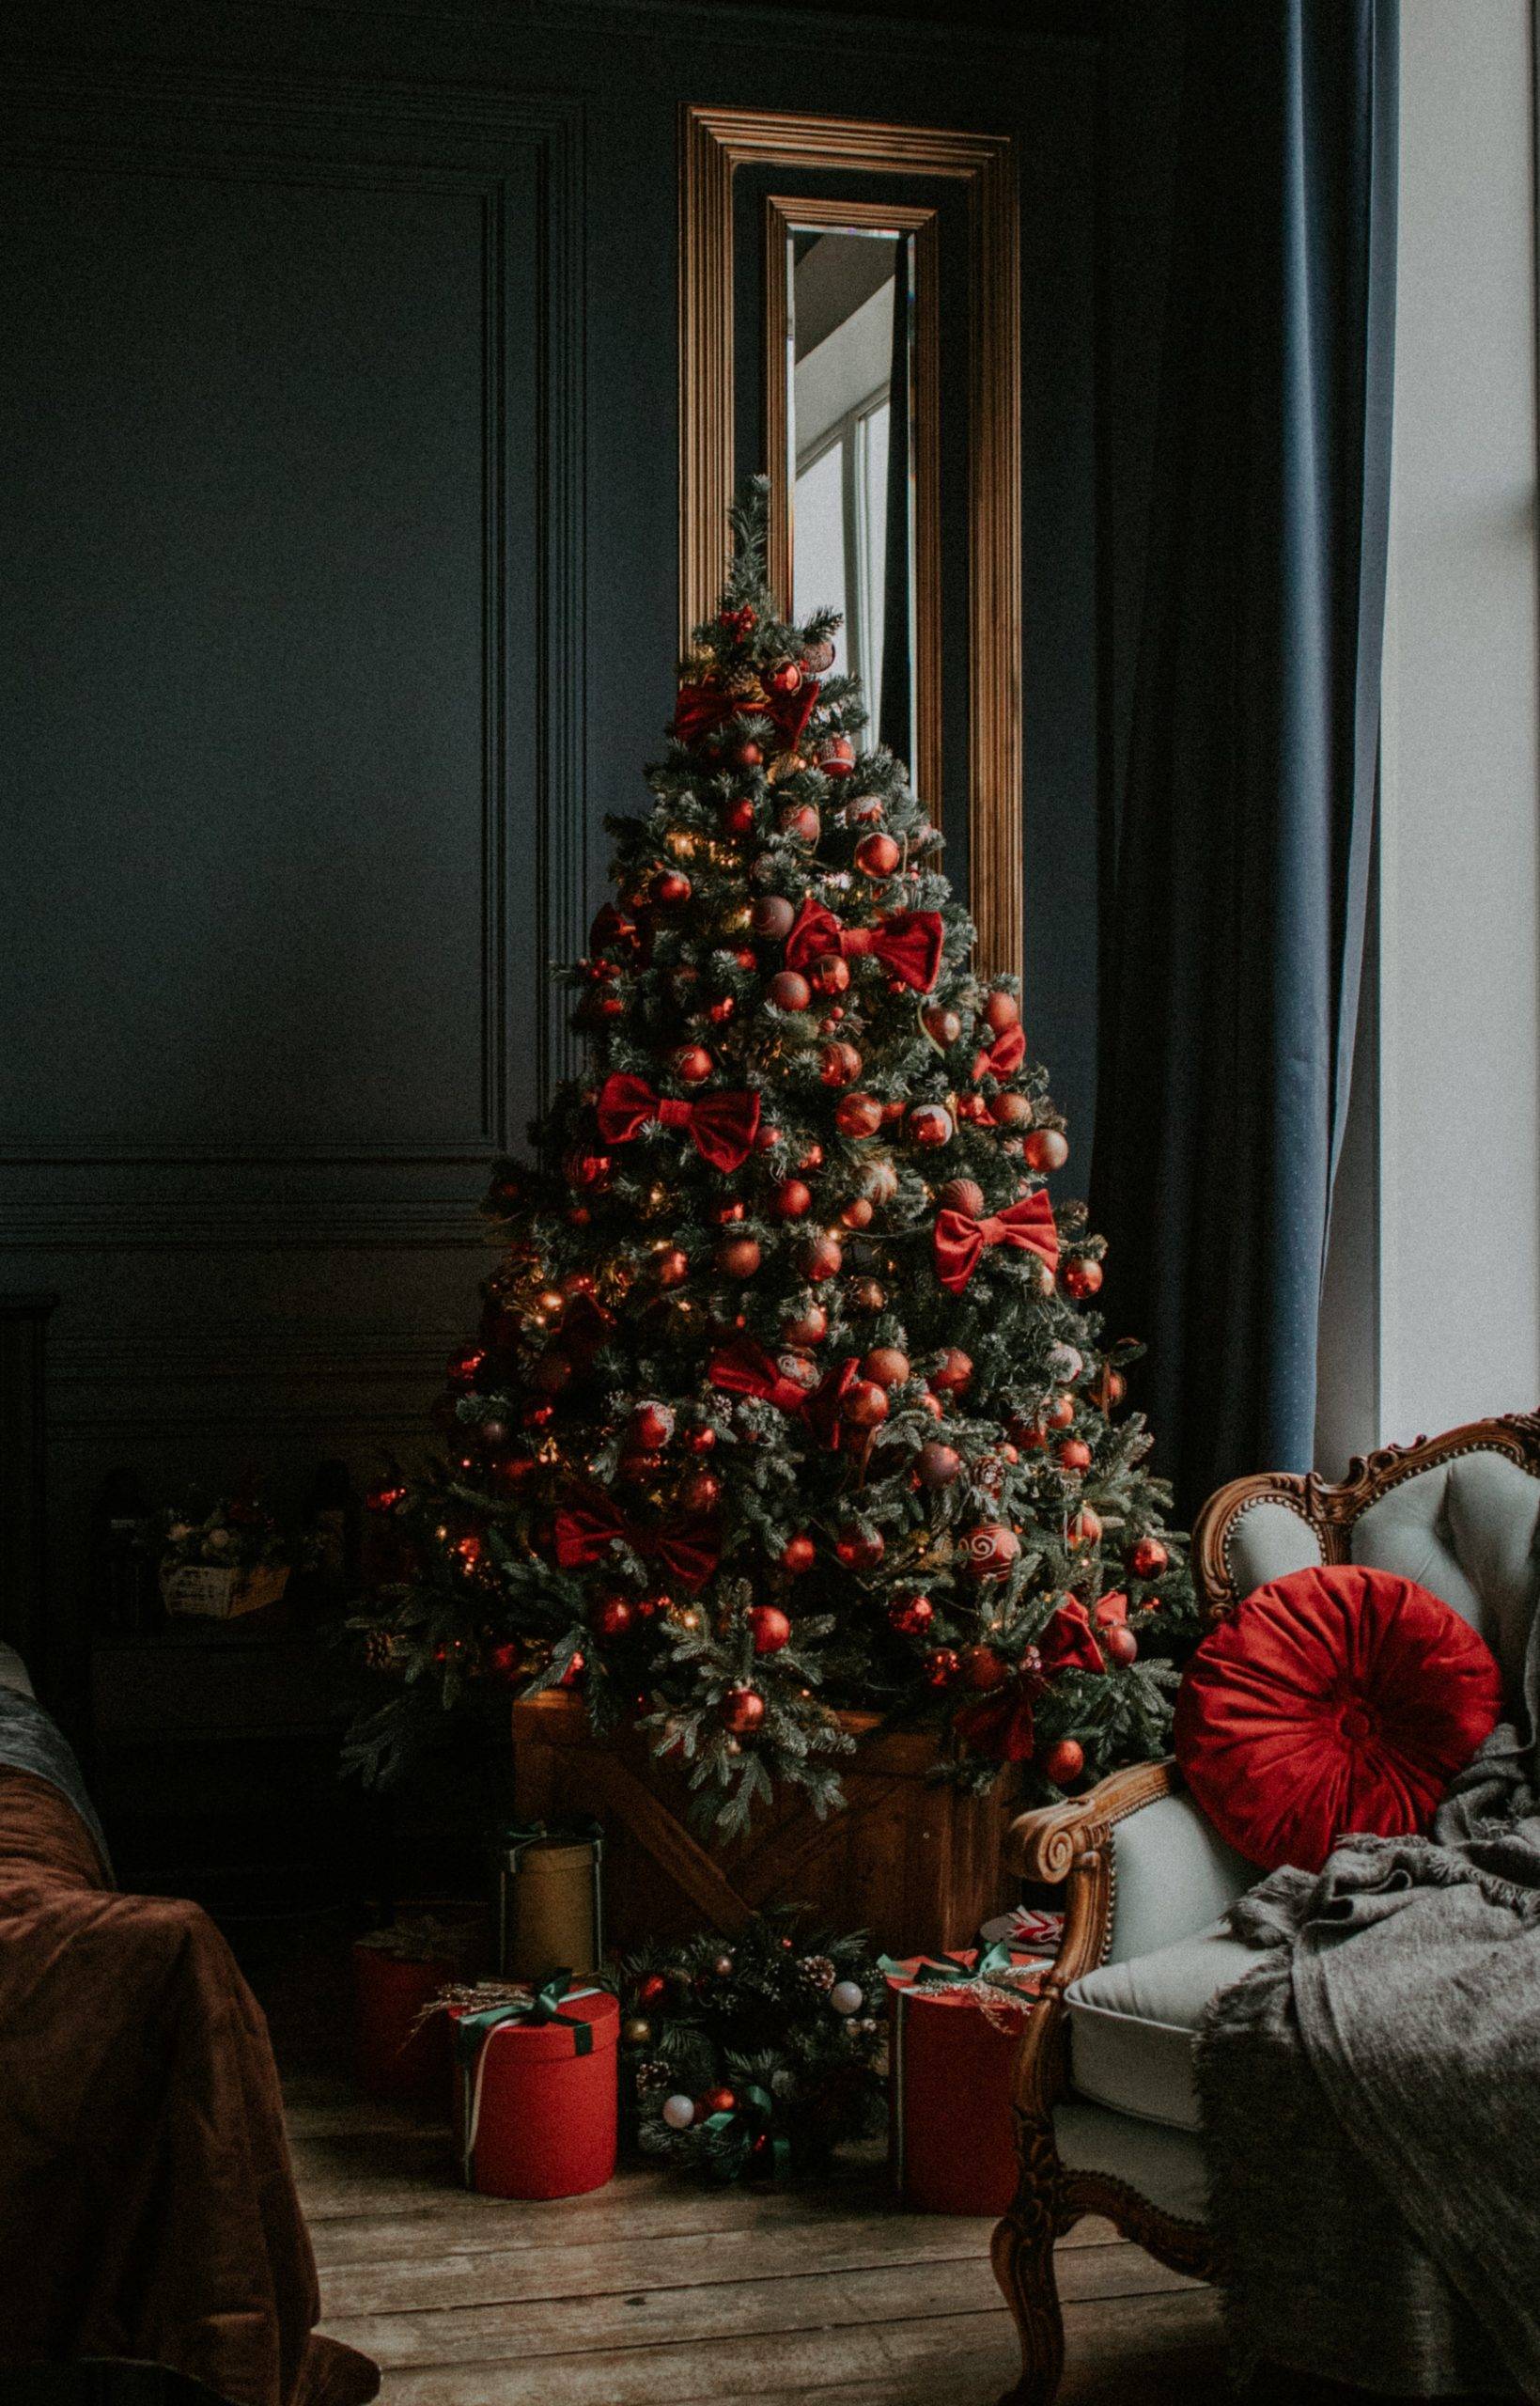 Luxurious Christmas tree dressed in red (from Unsplash)